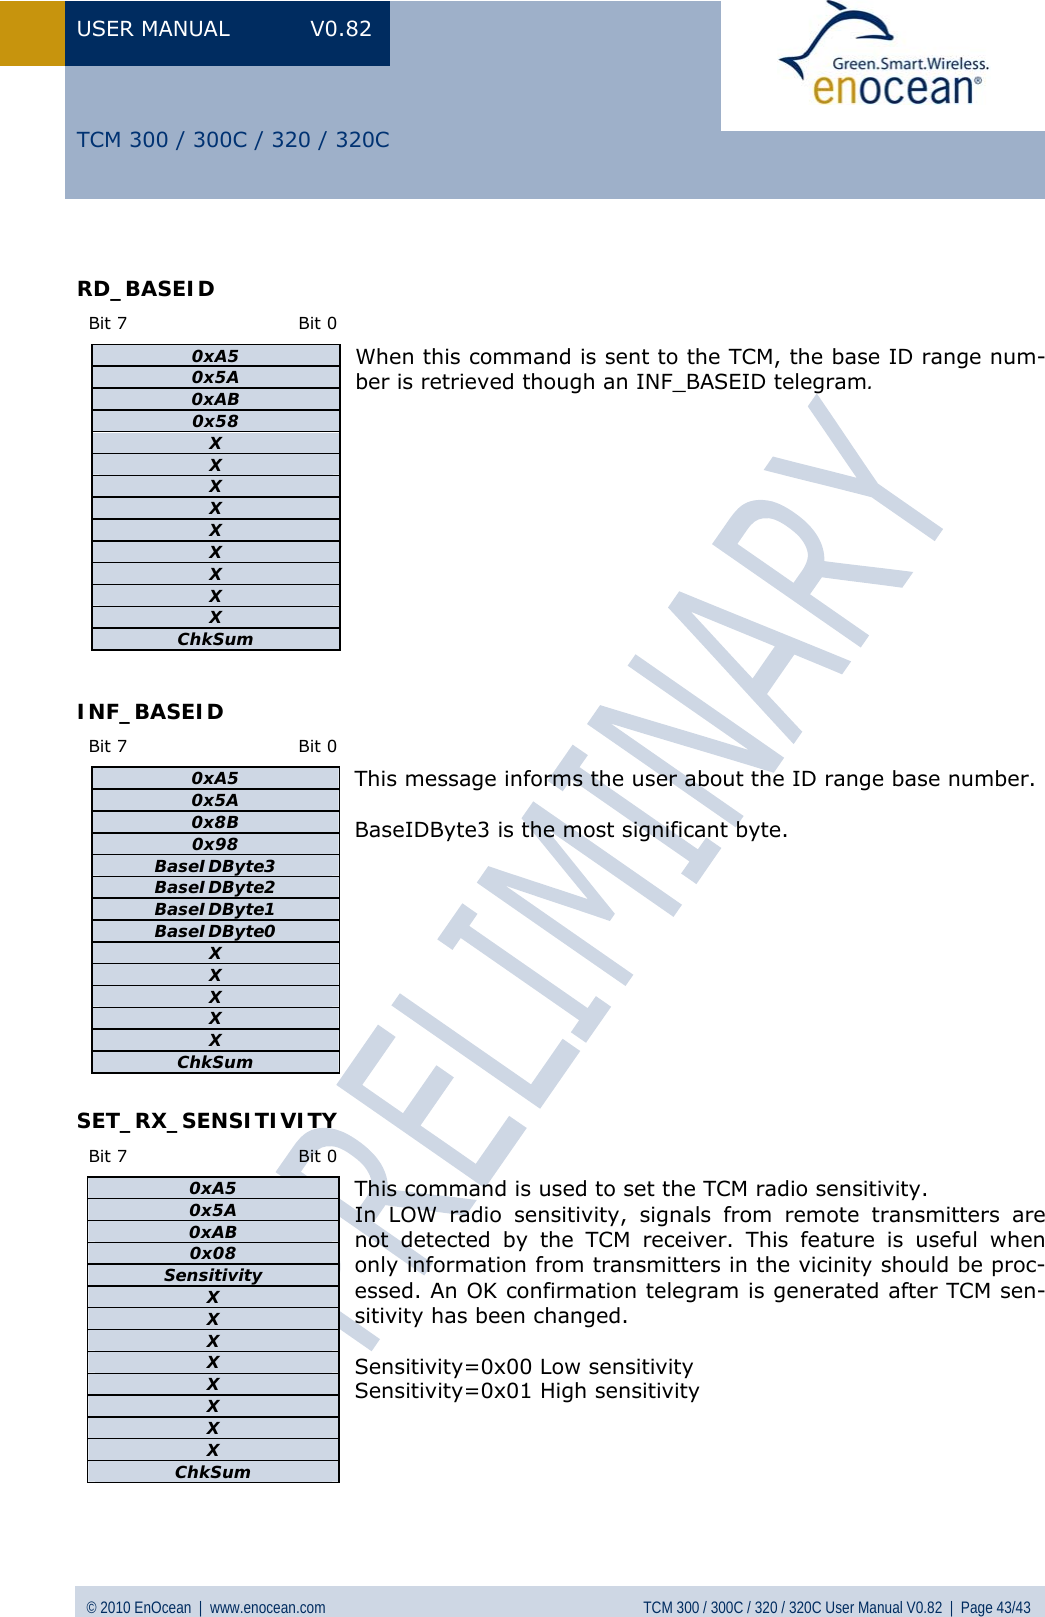 USER MANUAL V0.82 © 2010 EnOcean  |  www.enocean.com  TCM 300 / 300C / 320 / 320C User Manual V0.82  |  Page 43/43   TCM 300 / 300C / 320 / 320C  RD_BASEID   Bit 7      Bit 0 When this command is sent to the TCM, the base ID range num-ber is retrieved though an INF_BASEID telegram.        INF_BASEID   Bit 7      Bit 0 This message informs the user about the ID range base number.  BaseIDByte3 is the most significant byte.       SET_RX_SENSITIVITY   Bit 7      Bit 0 This command is used to set the TCM radio sensitivity. In LOW radio sensitivity, signals from remote transmitters are not detected by the TCM receiver. This feature is useful when only information from transmitters in the vicinity should be proc-essed. An OK confirmation telegram is generated after TCM sen-sitivity has been changed.  Sensitivity=0x00 Low sensitivity Sensitivity=0x01 High sensitivity     0xA5 0x5A 0xAB 0x58 X X X X X X X X X ChkSum 0xA5 0x5A 0x8B 0x98 BaseIDByte3 BaseIDByte2 BaseIDByte1 BaseIDByte0 X X X X X ChkSum 0xA5 0x5A 0xAB 0x08 Sensitivity X X X X X X X X ChkSum 